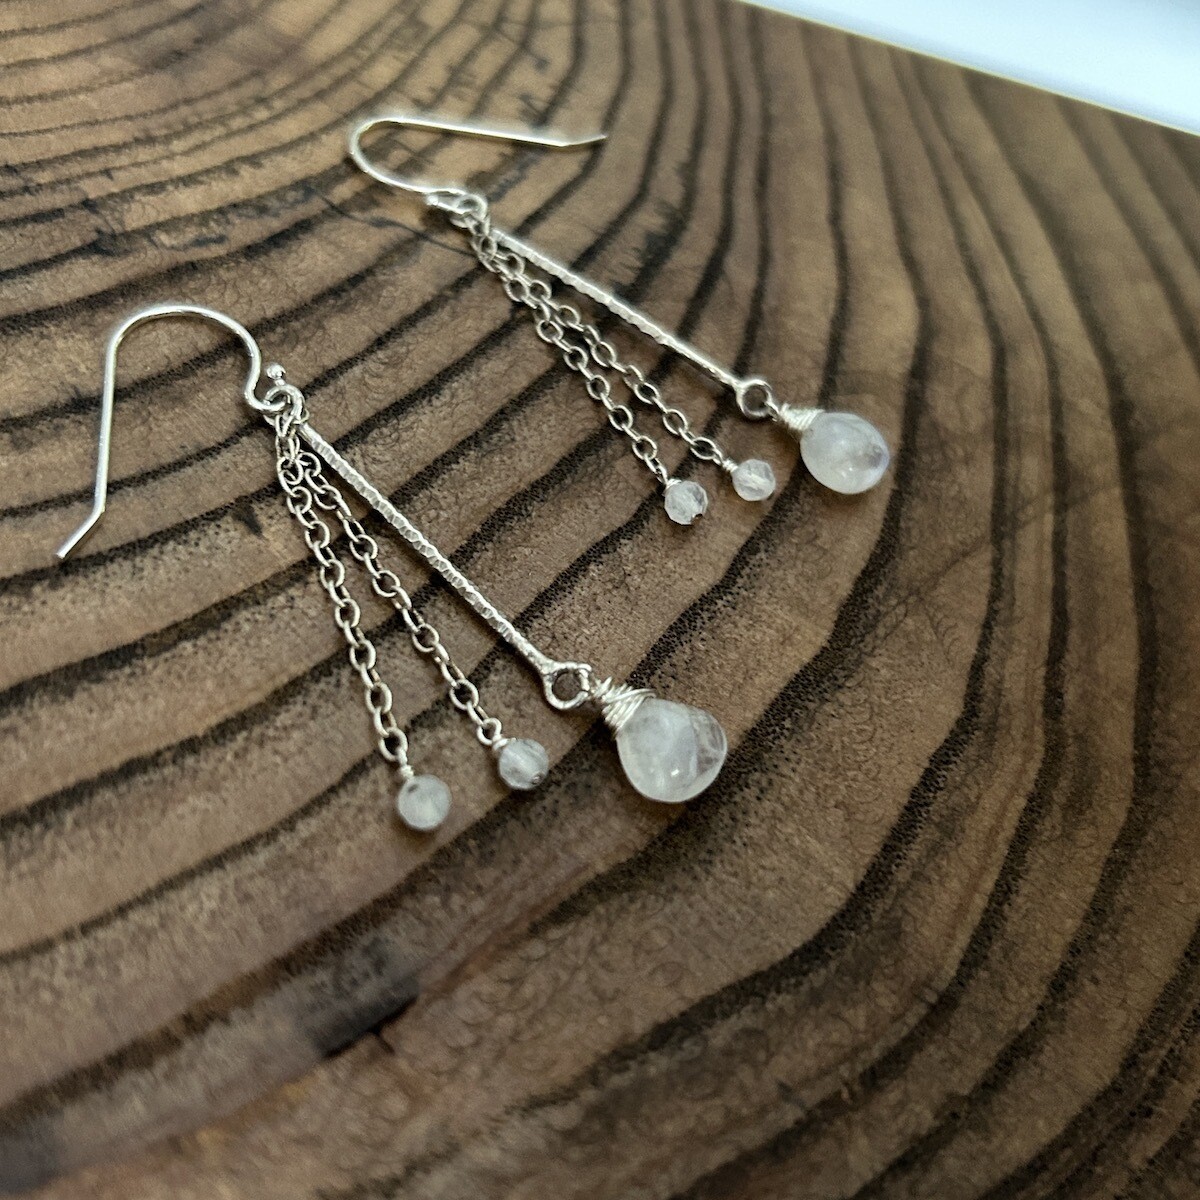 Handmade Silver Earrings with textured bar, rainbow moonstone briolette, rondelles on chains